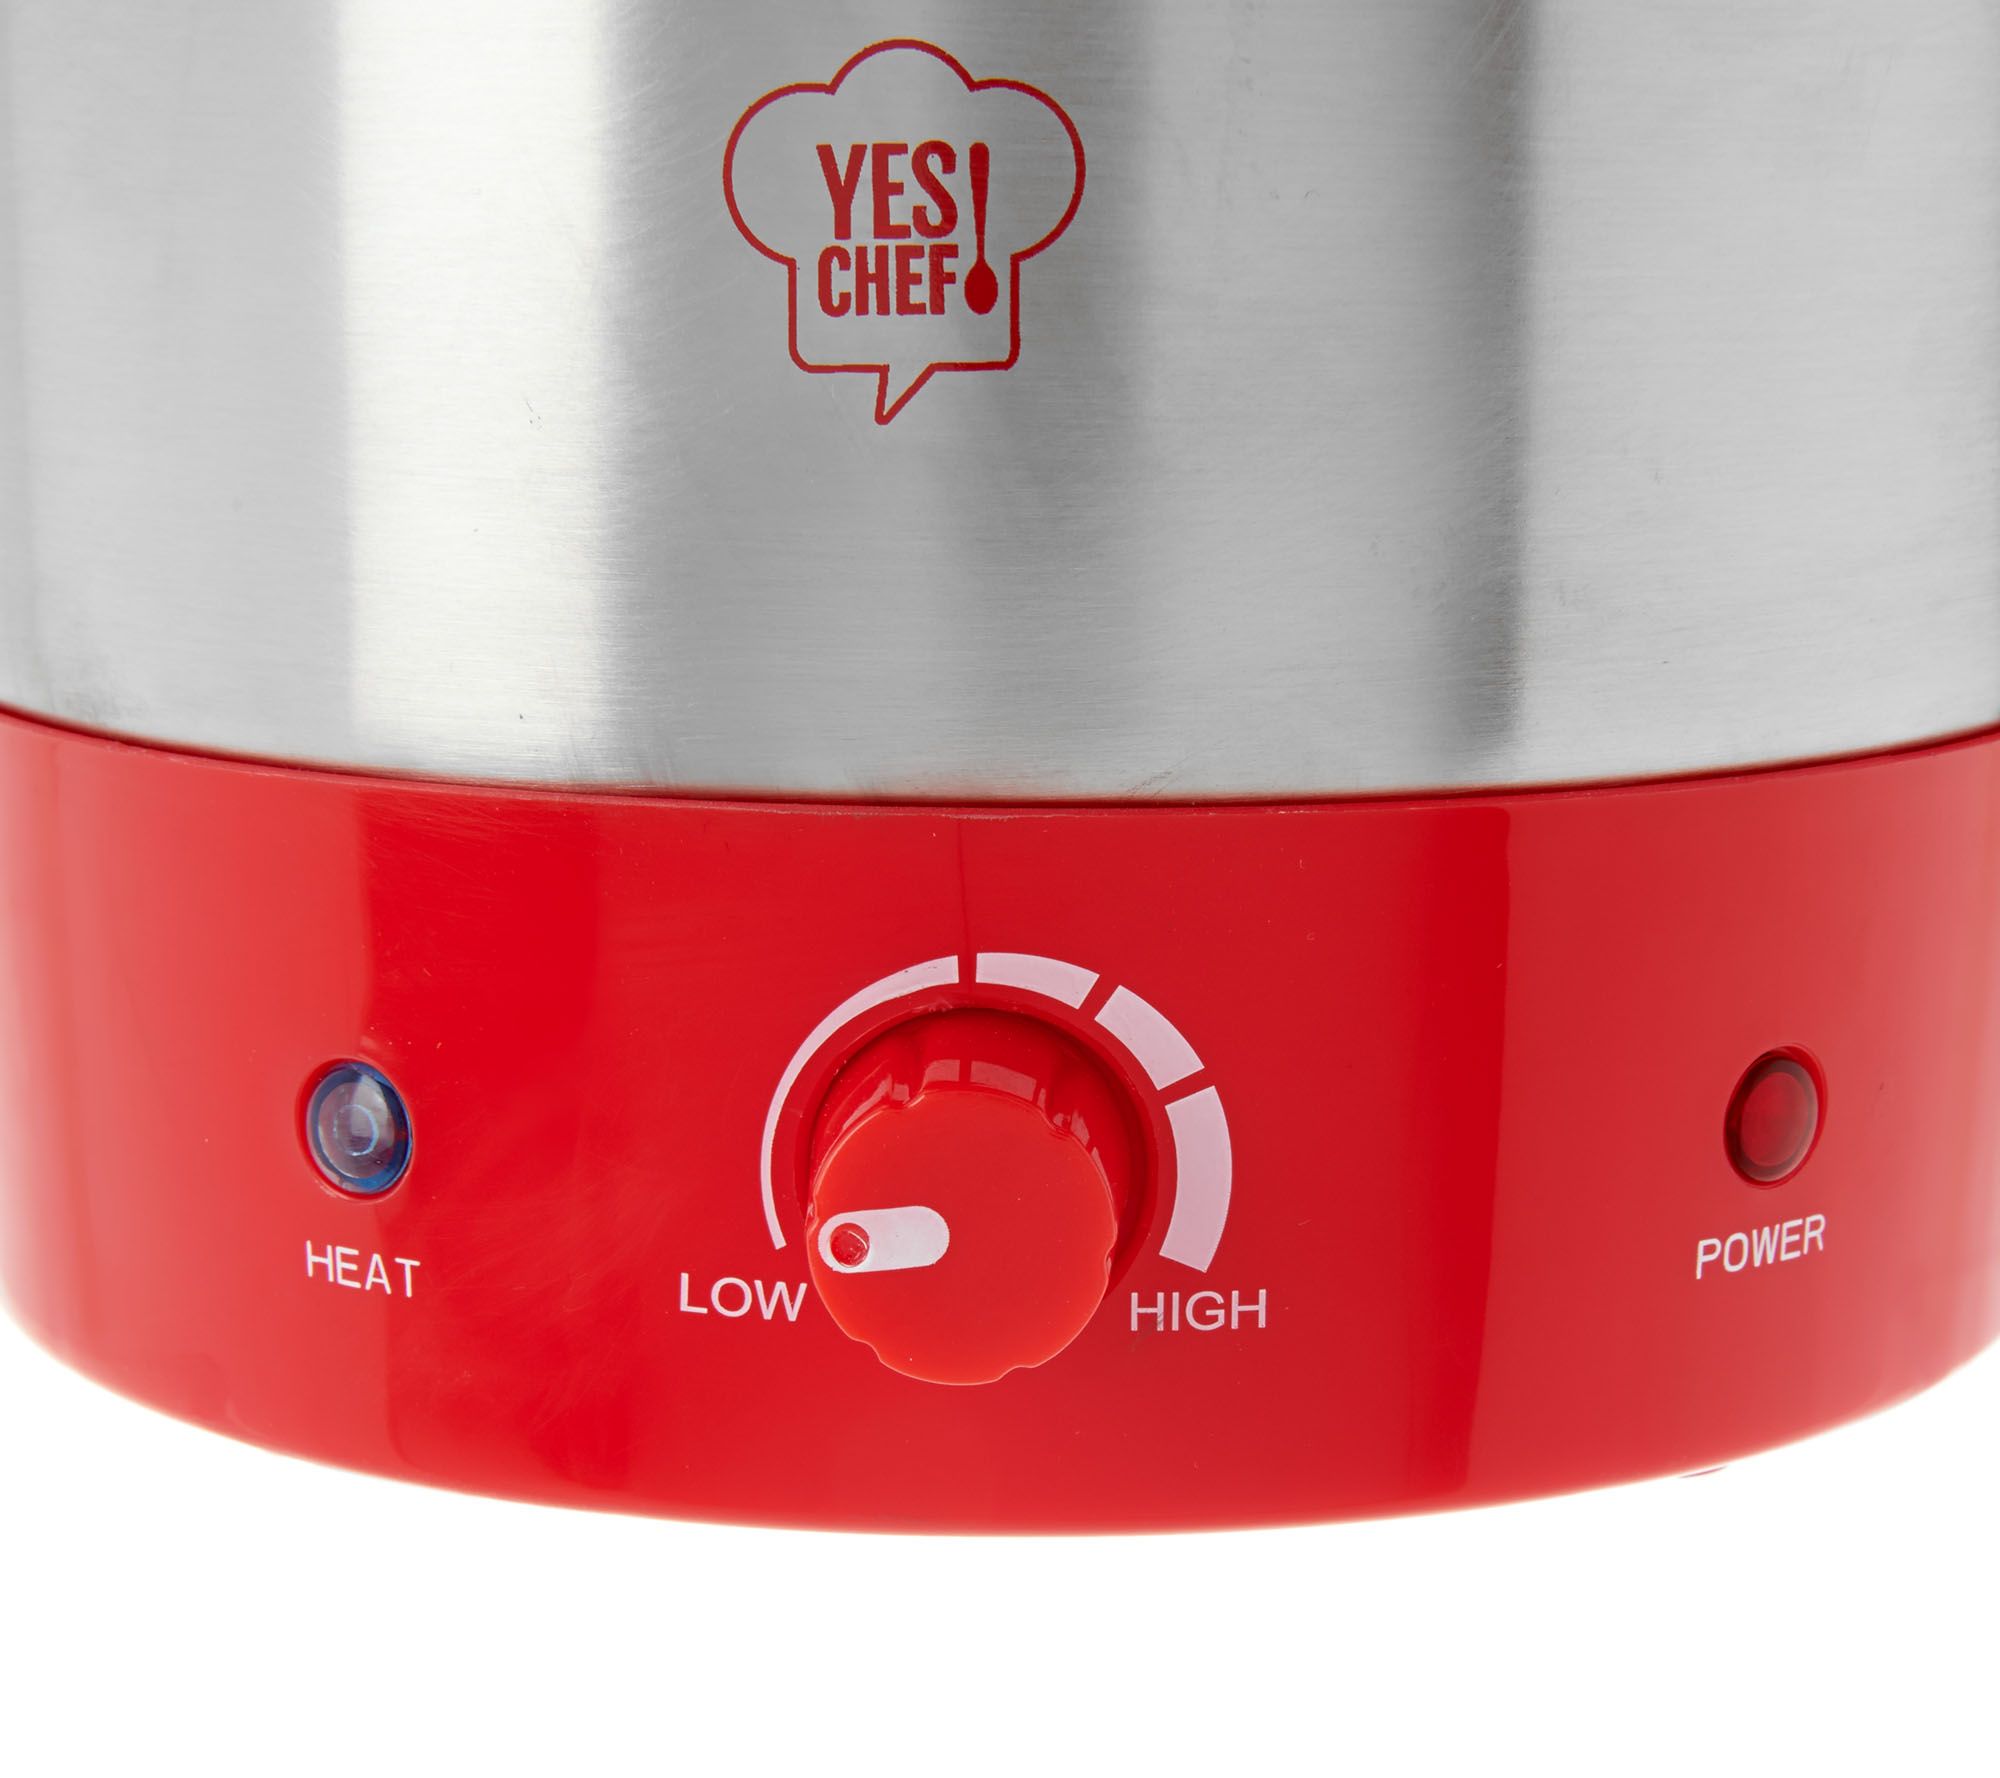 Yes Chef! Rapid Boil 2 Liter Electric Multi-Pot 